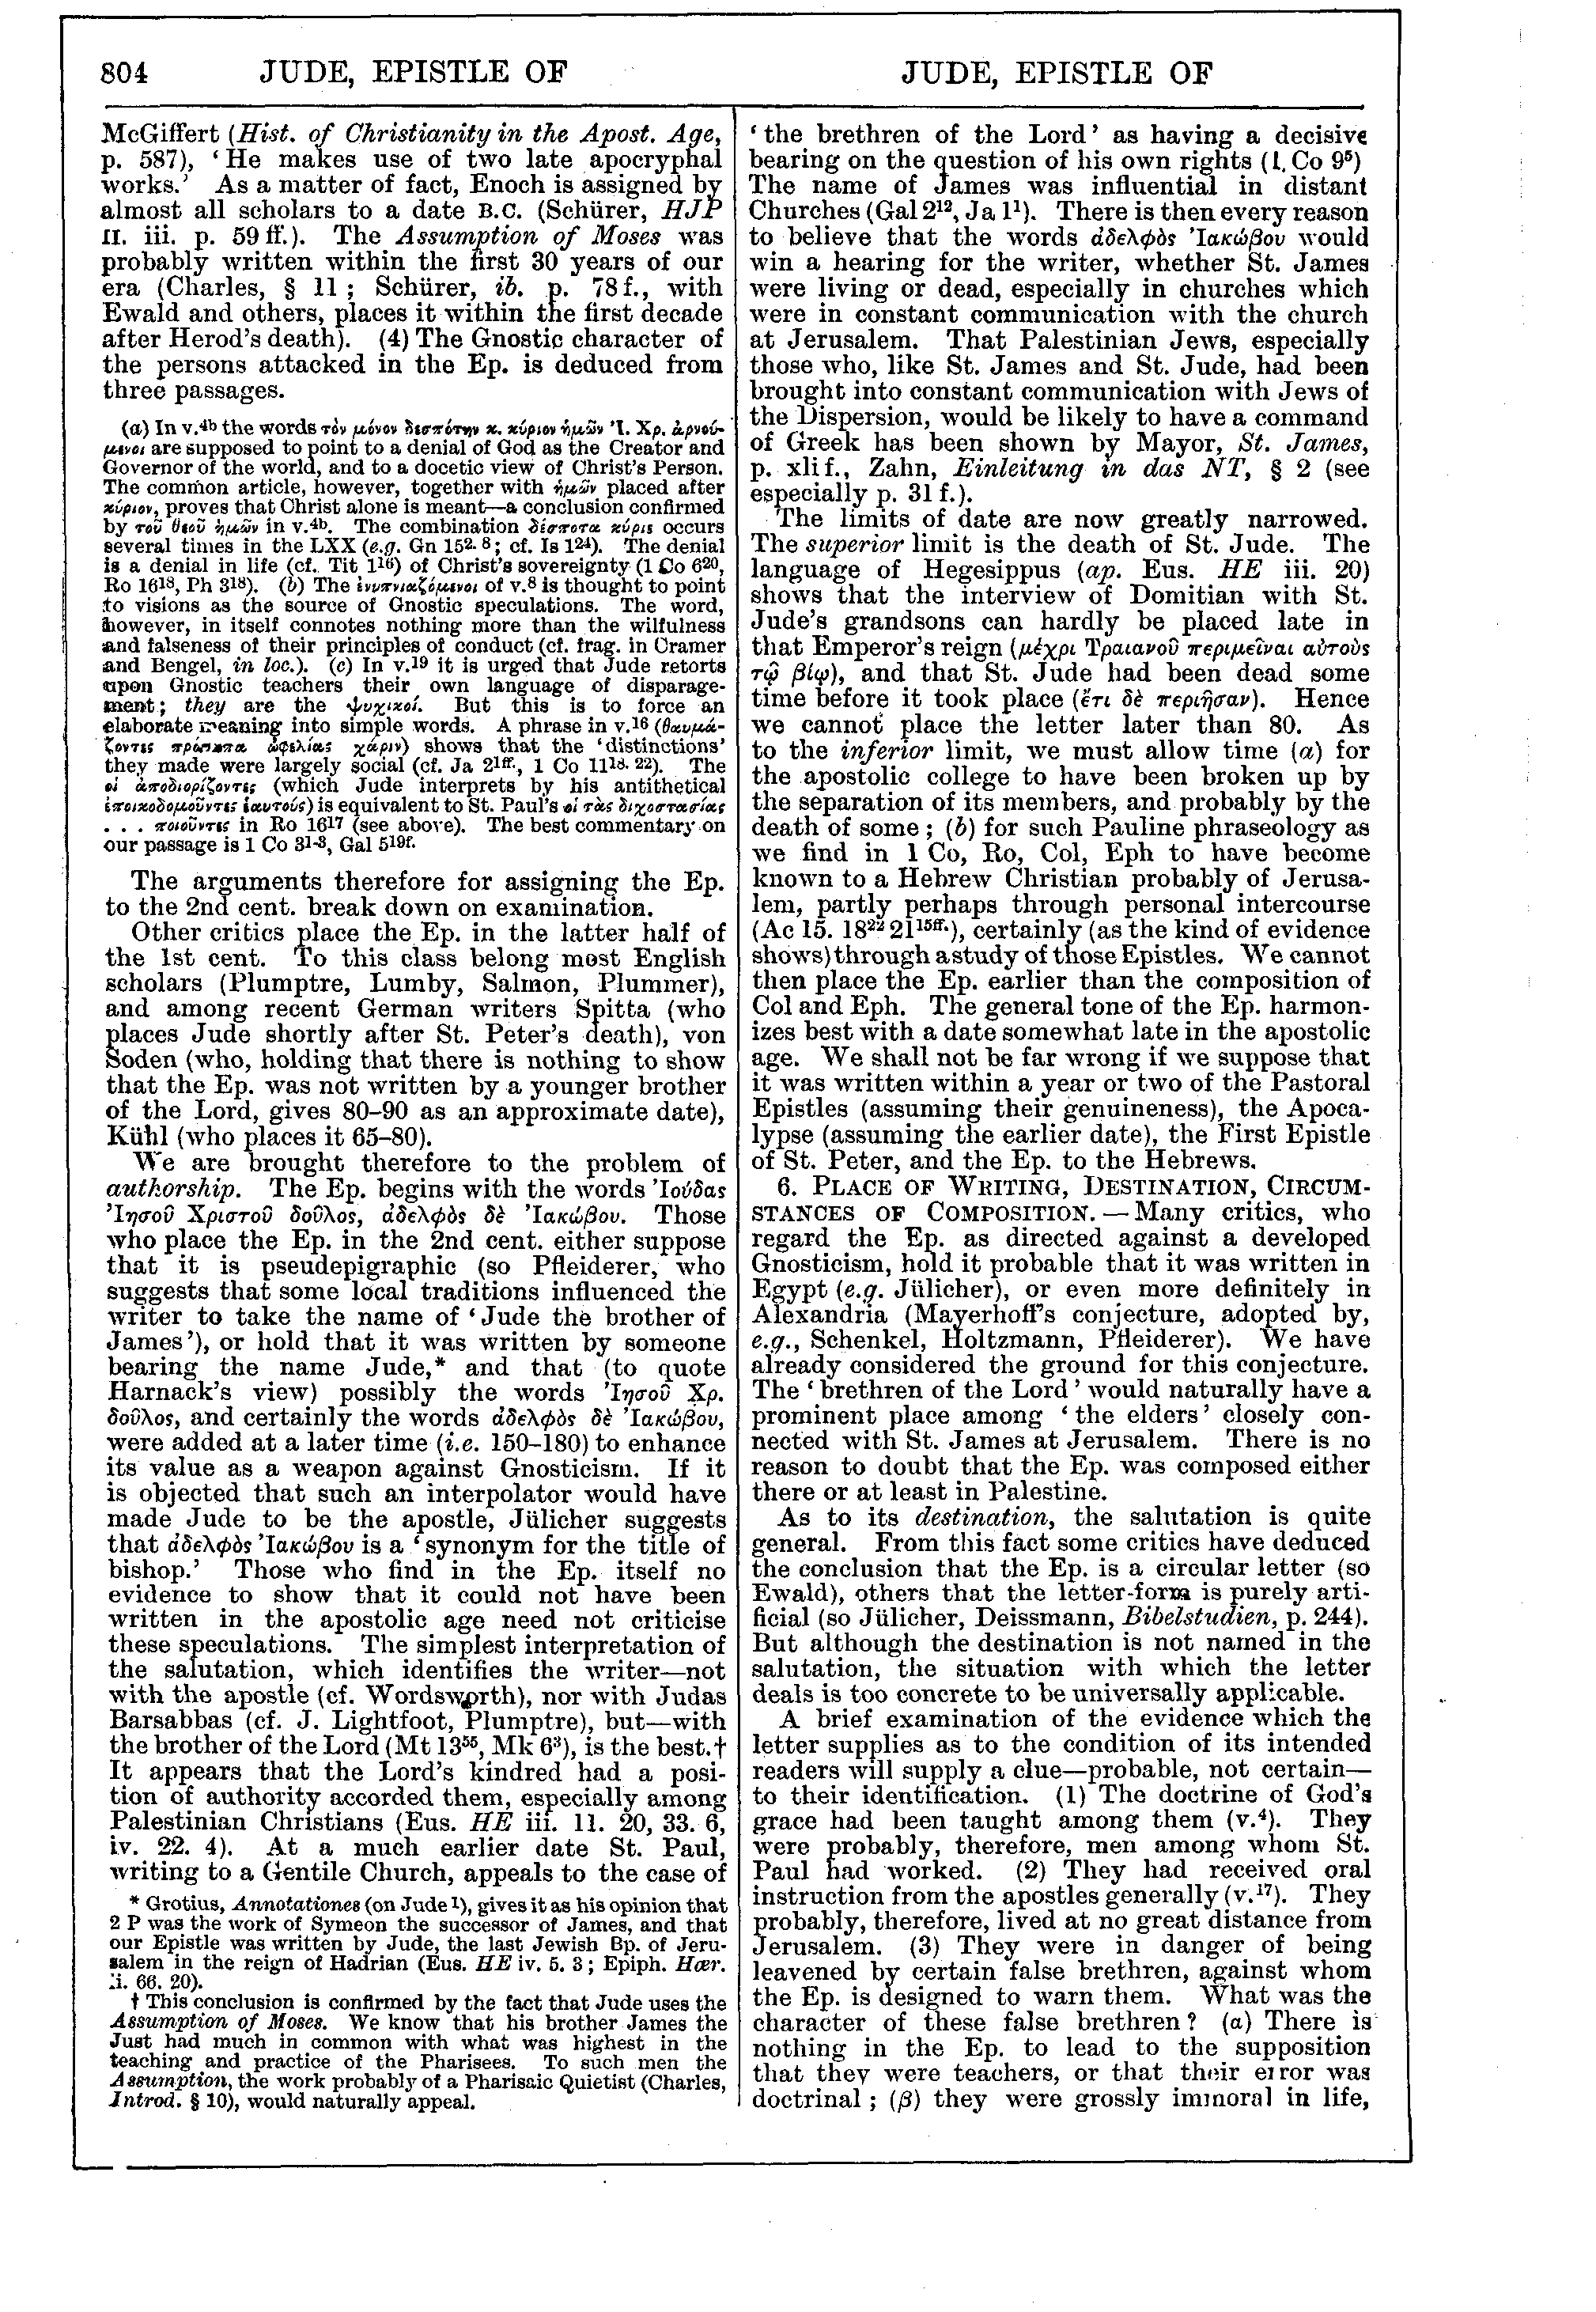 Image of page 804